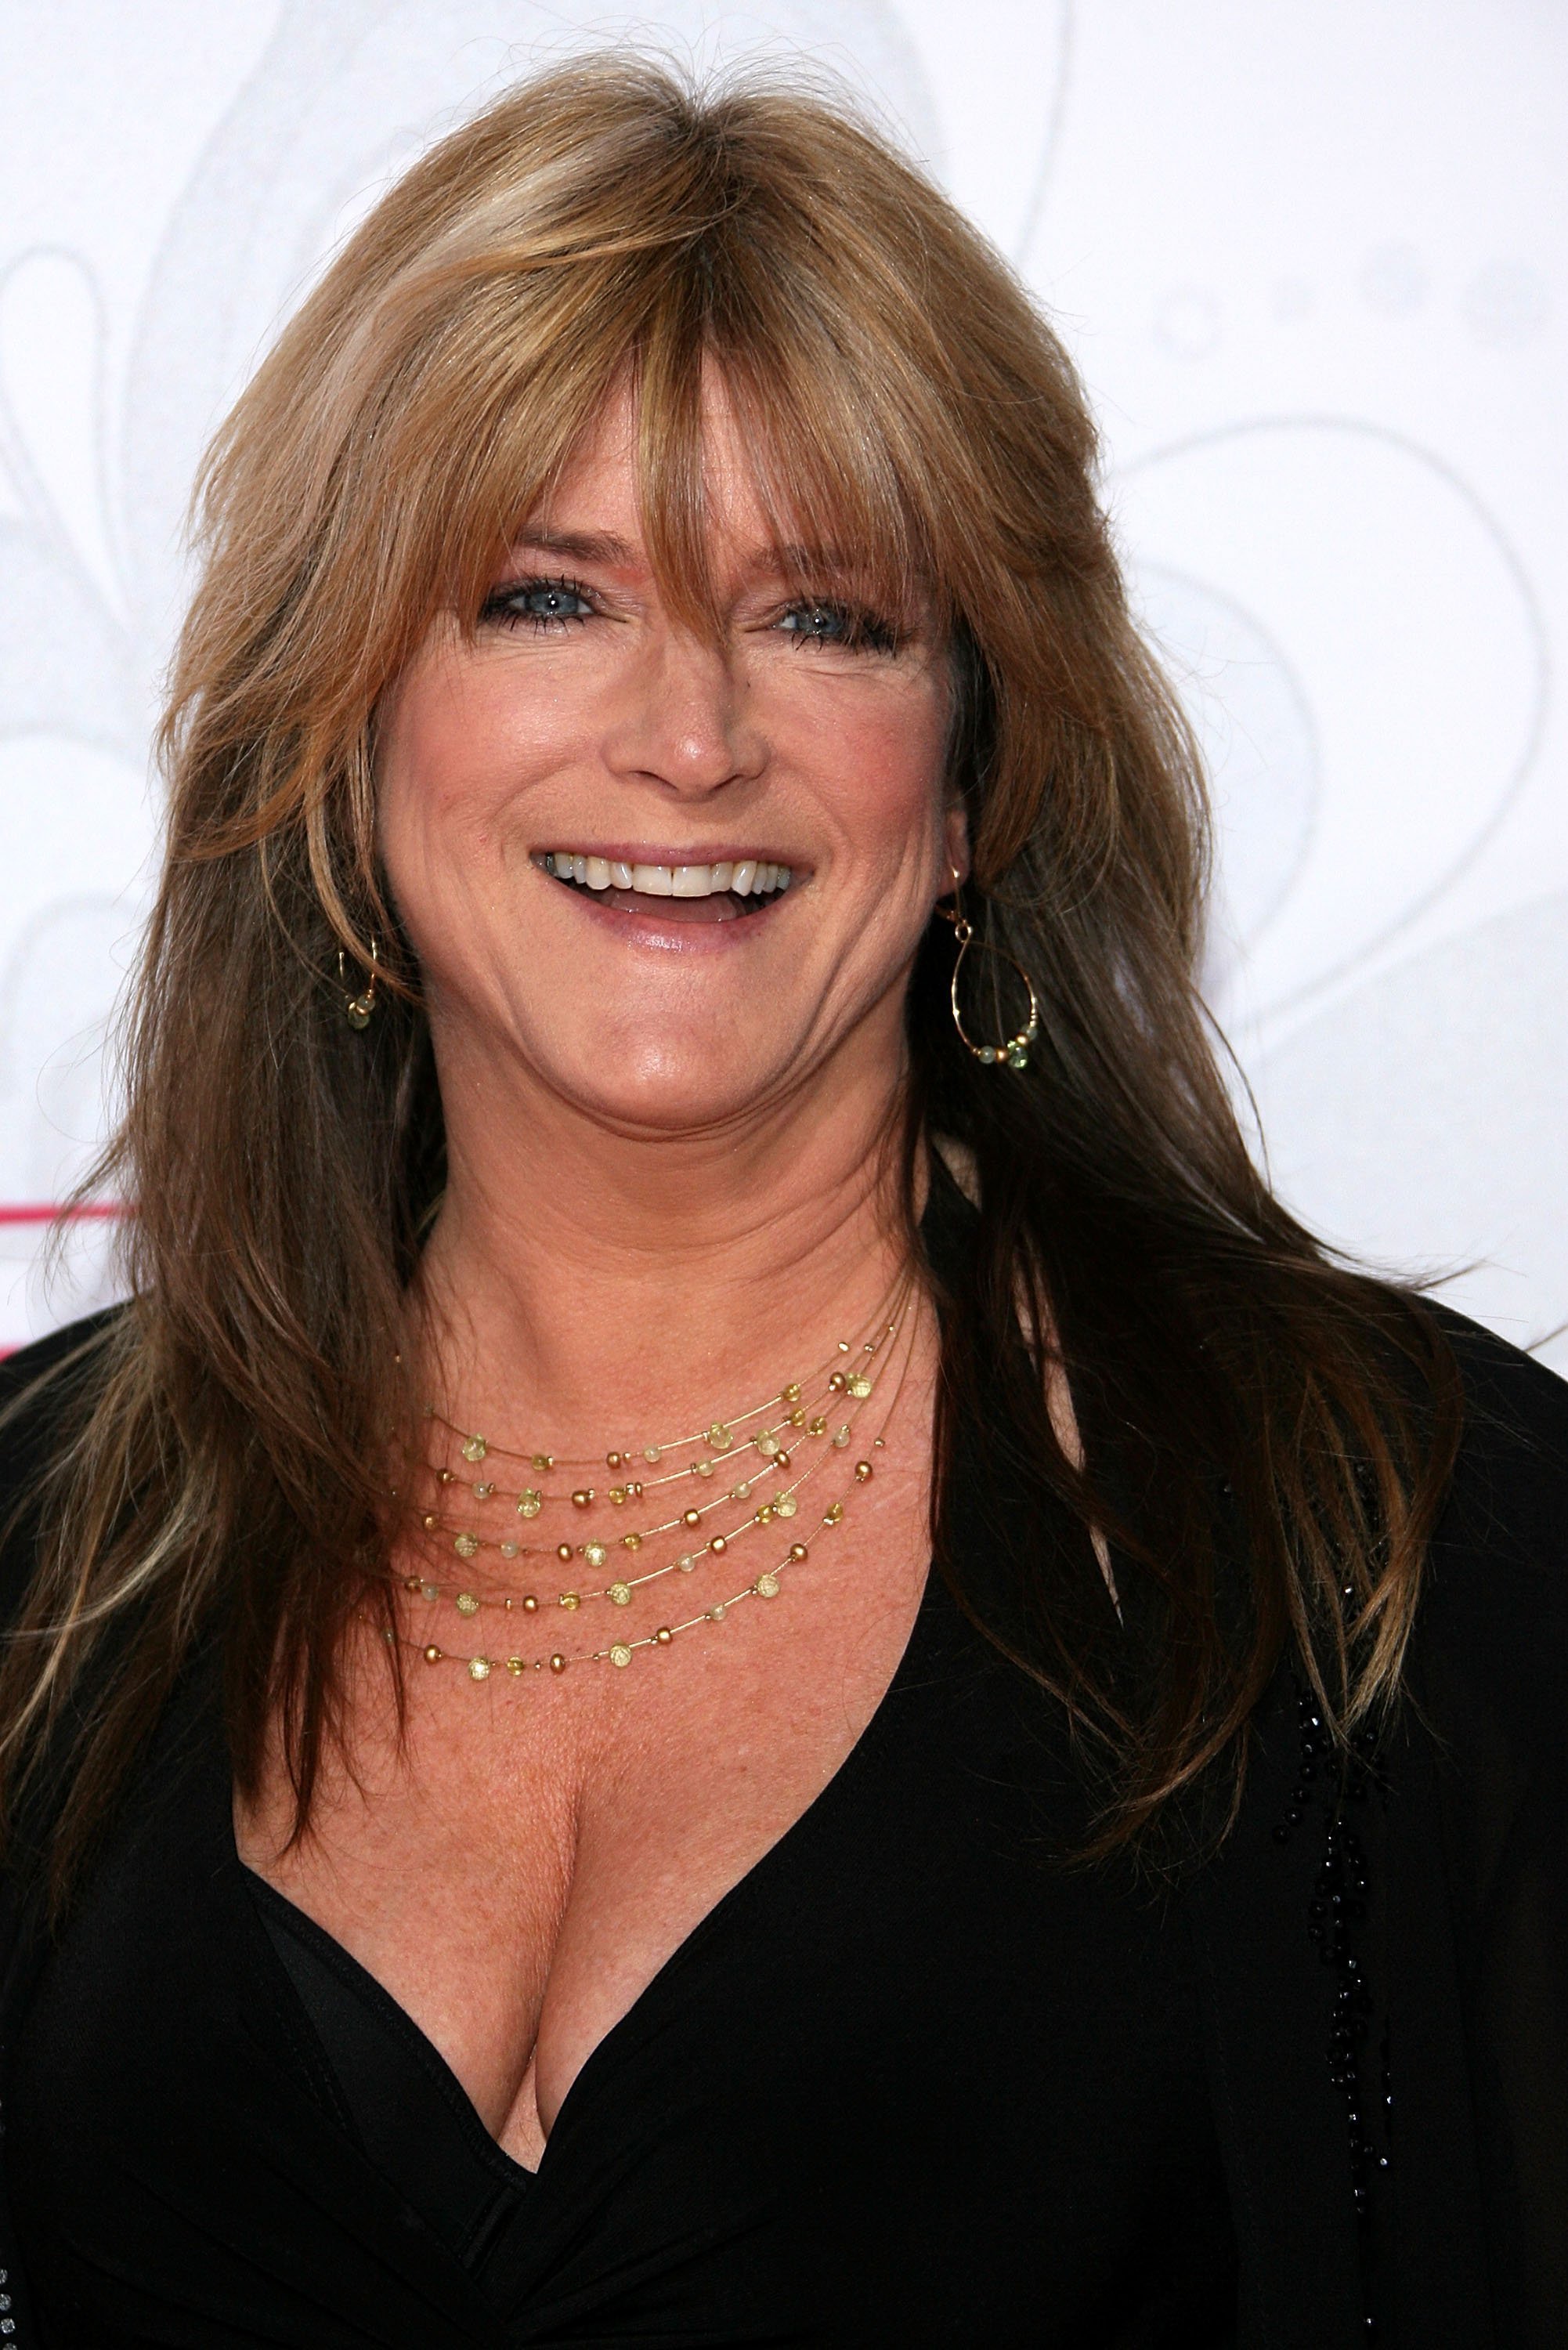 Susan Olsen attends the 5th Annual TV Land Awards in Santa Monica, California on April 14, 2007 | Photo: Getty Images